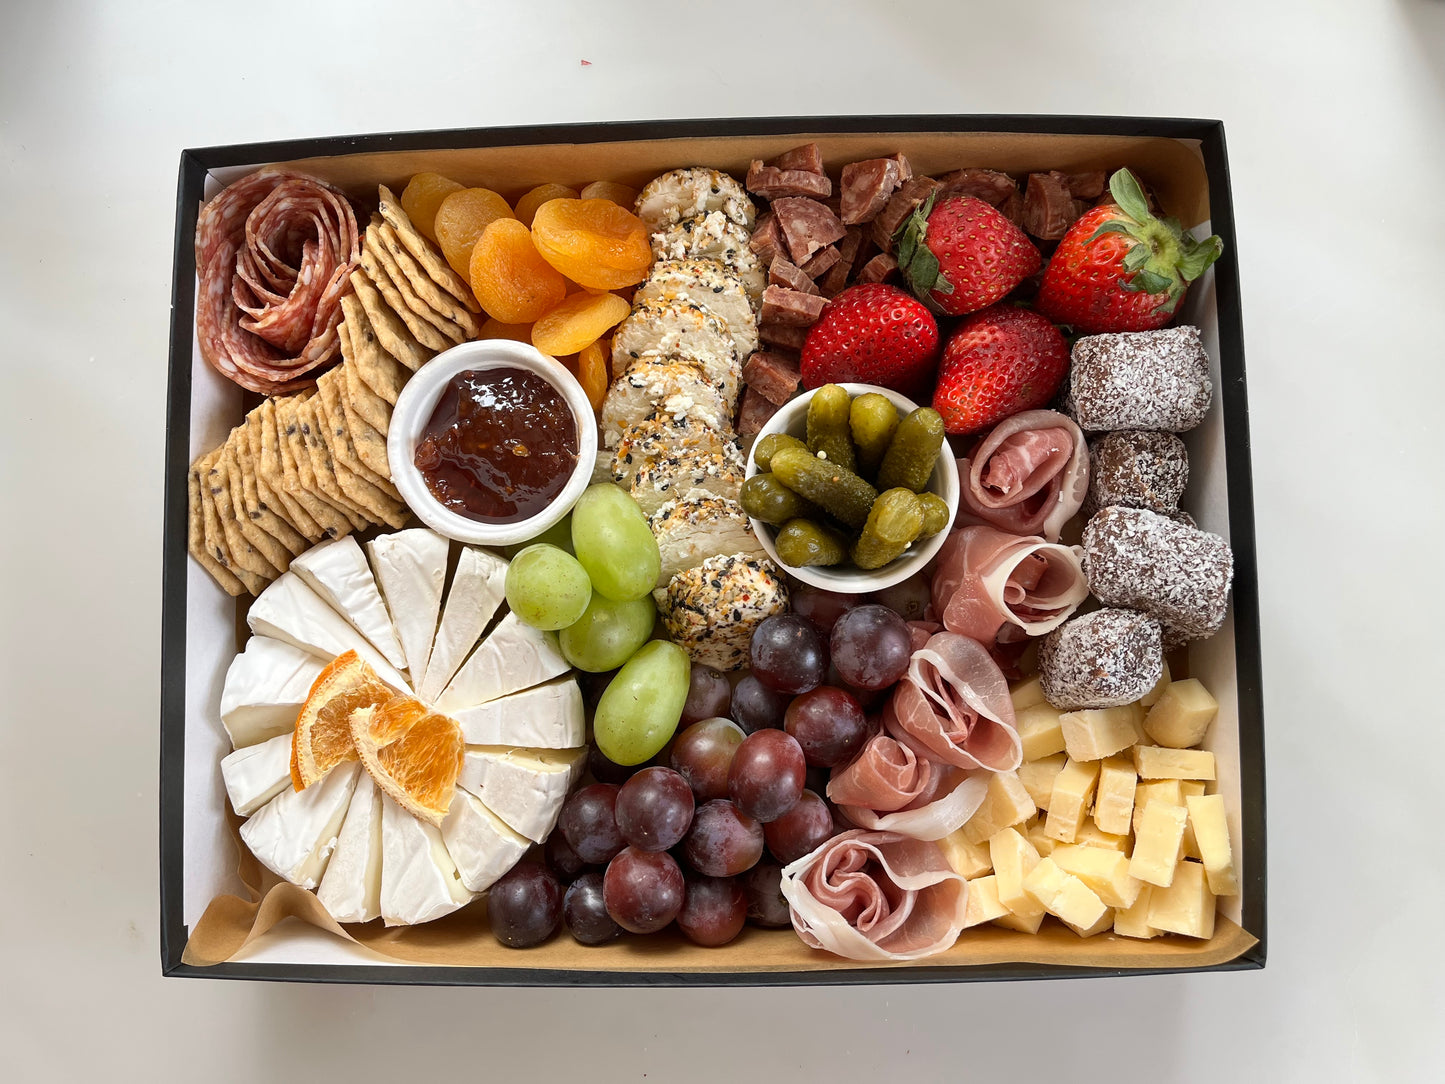 Game Day CharCUTErie Box – My CharCUTErie